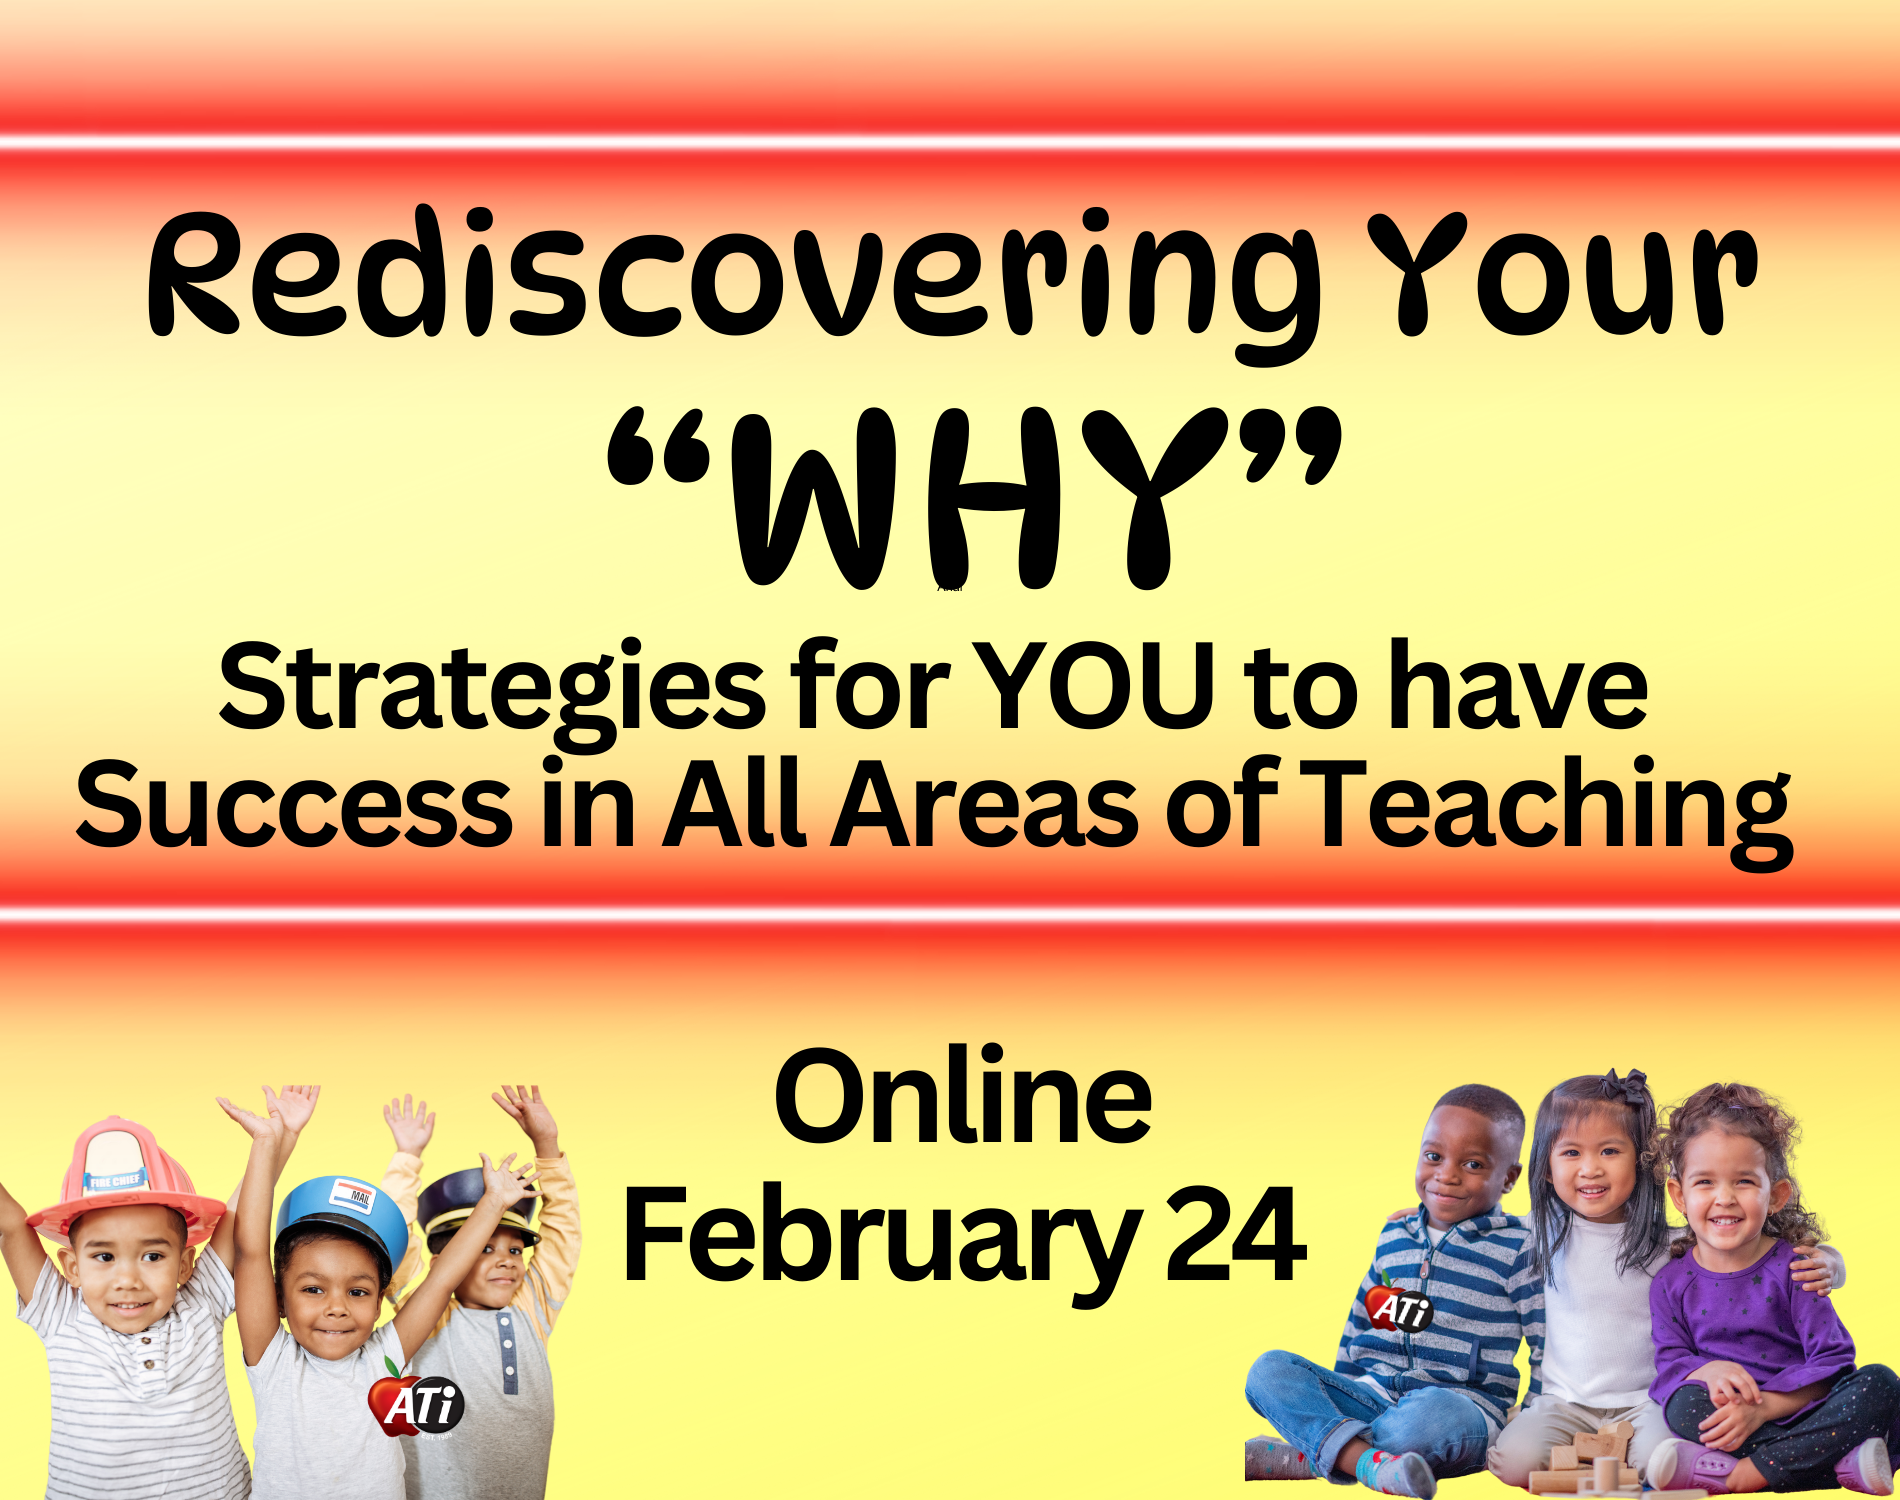 Image for Rediscovering Your Why Online